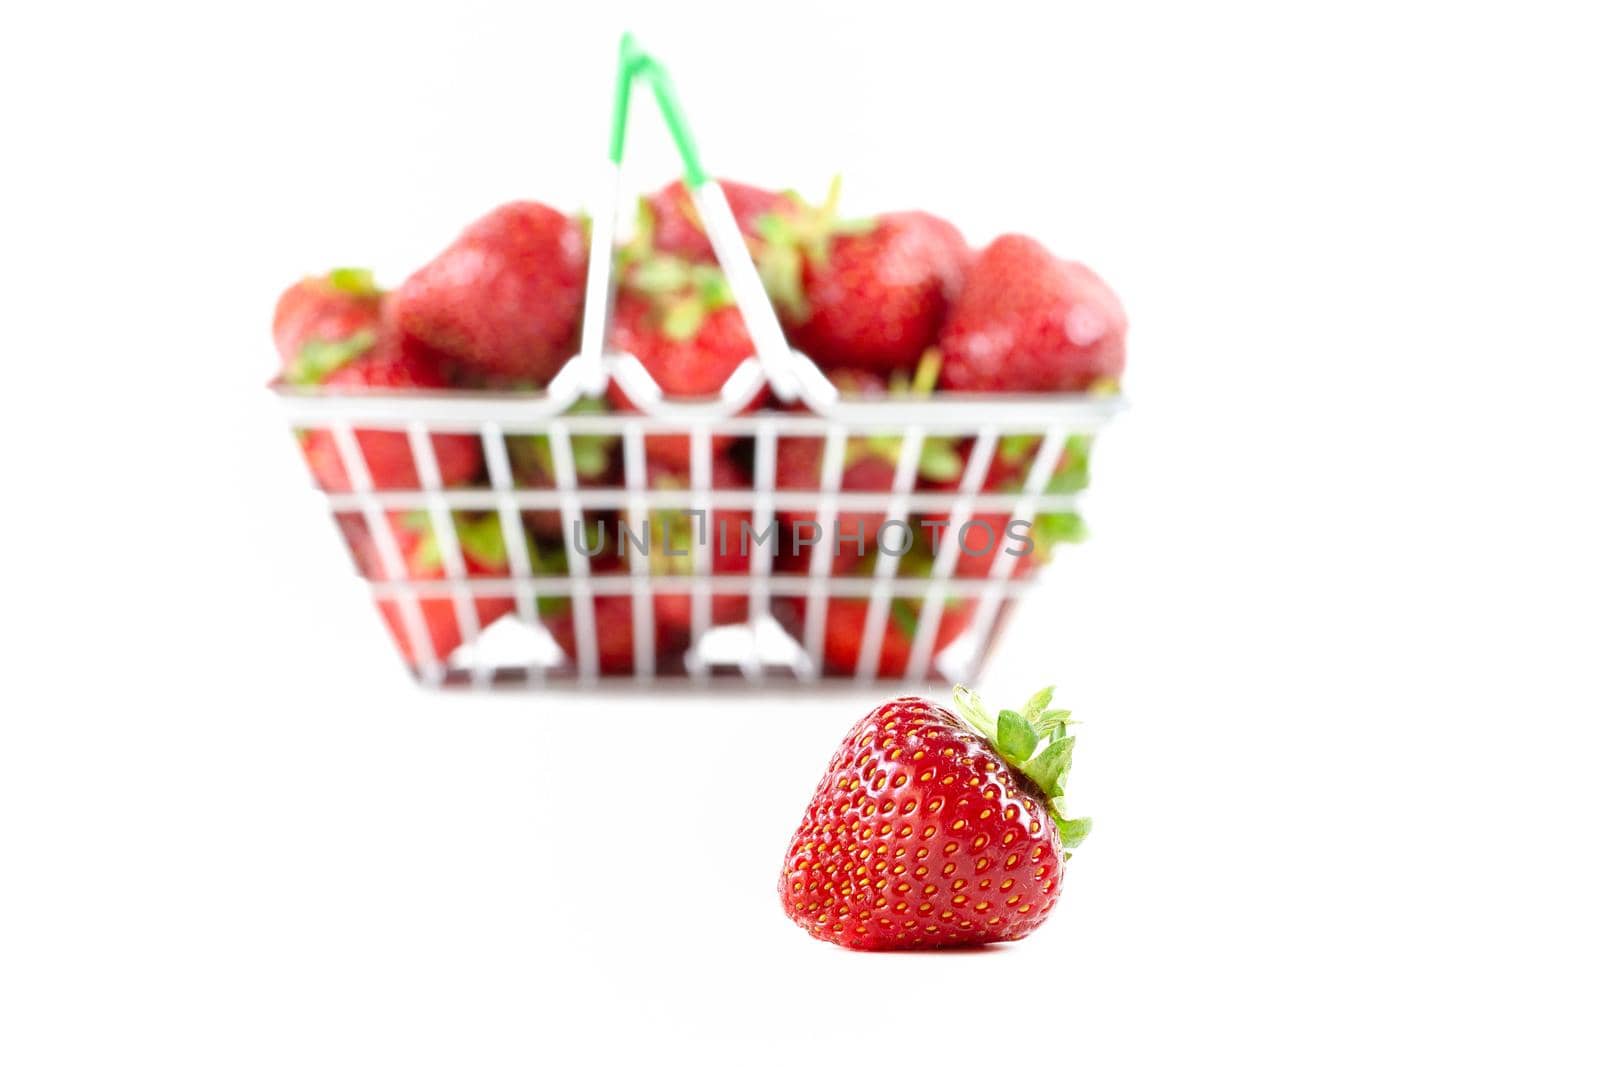 Fresh ripe strawberries in a mini shopping trolley isolated on a white background. Concept of a supermarket, market, or grocery store. copy space.